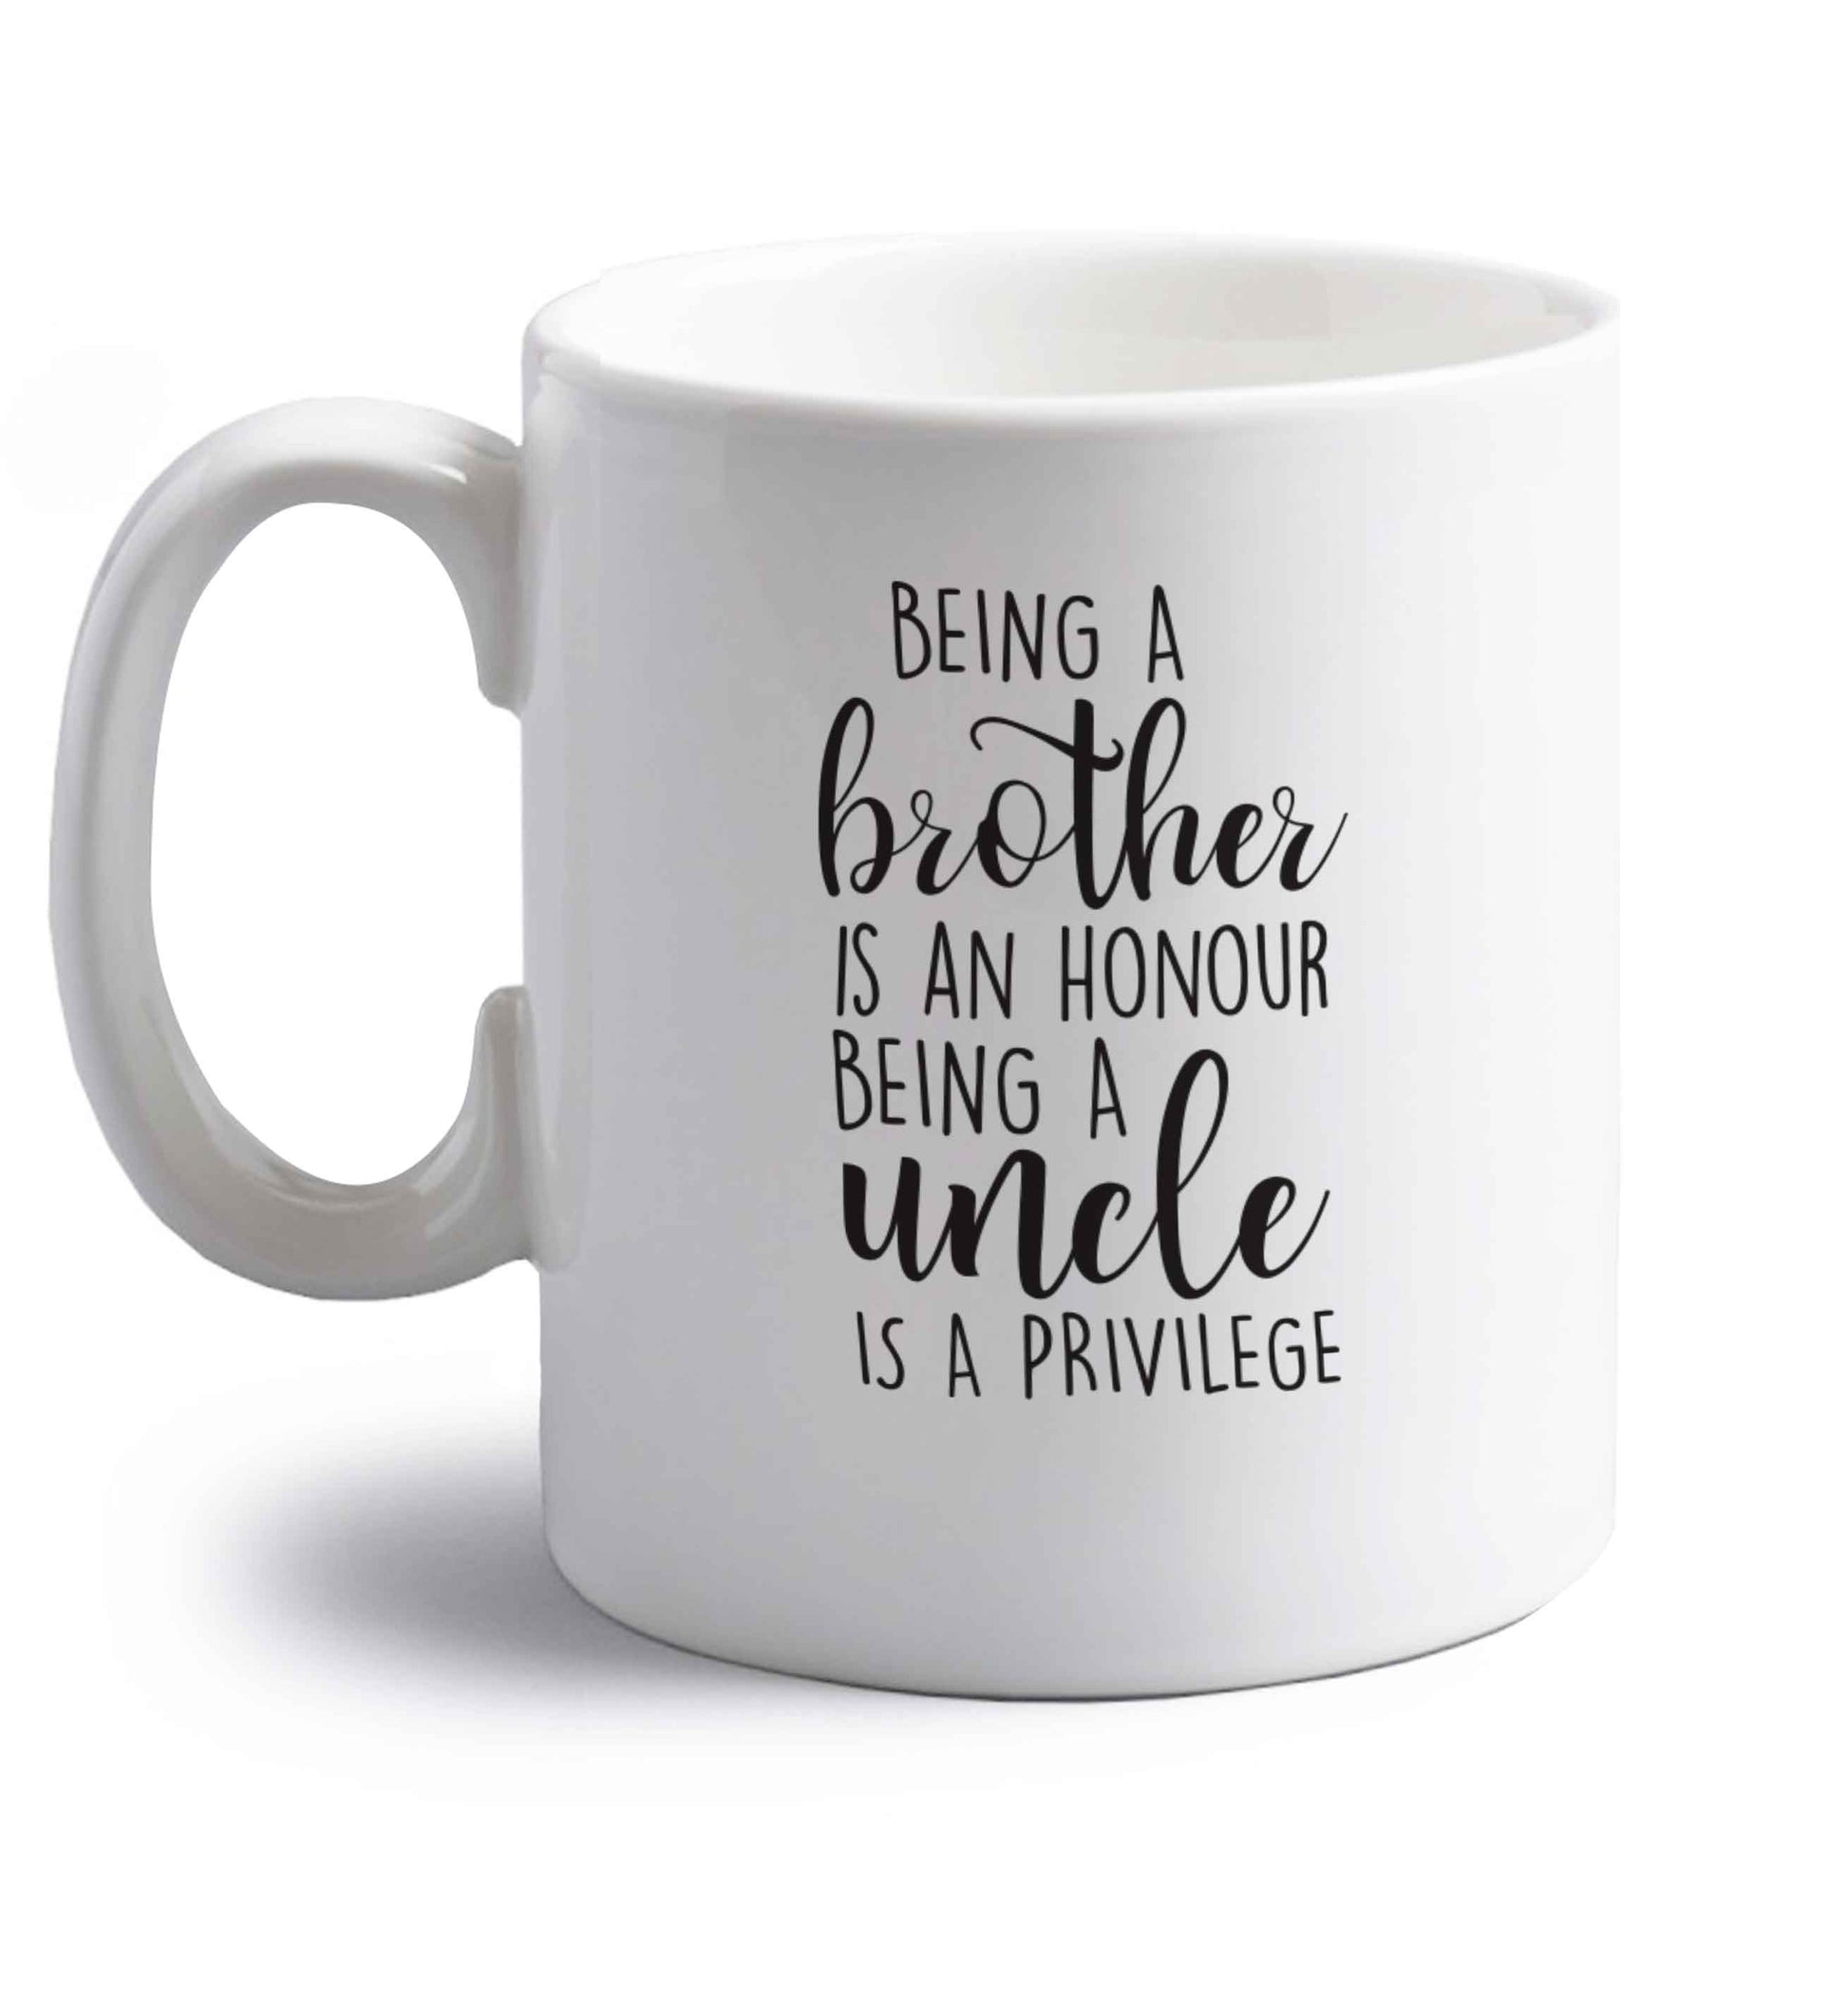 Being a brother is an honour being an uncle is a privilege right handed white ceramic mug 